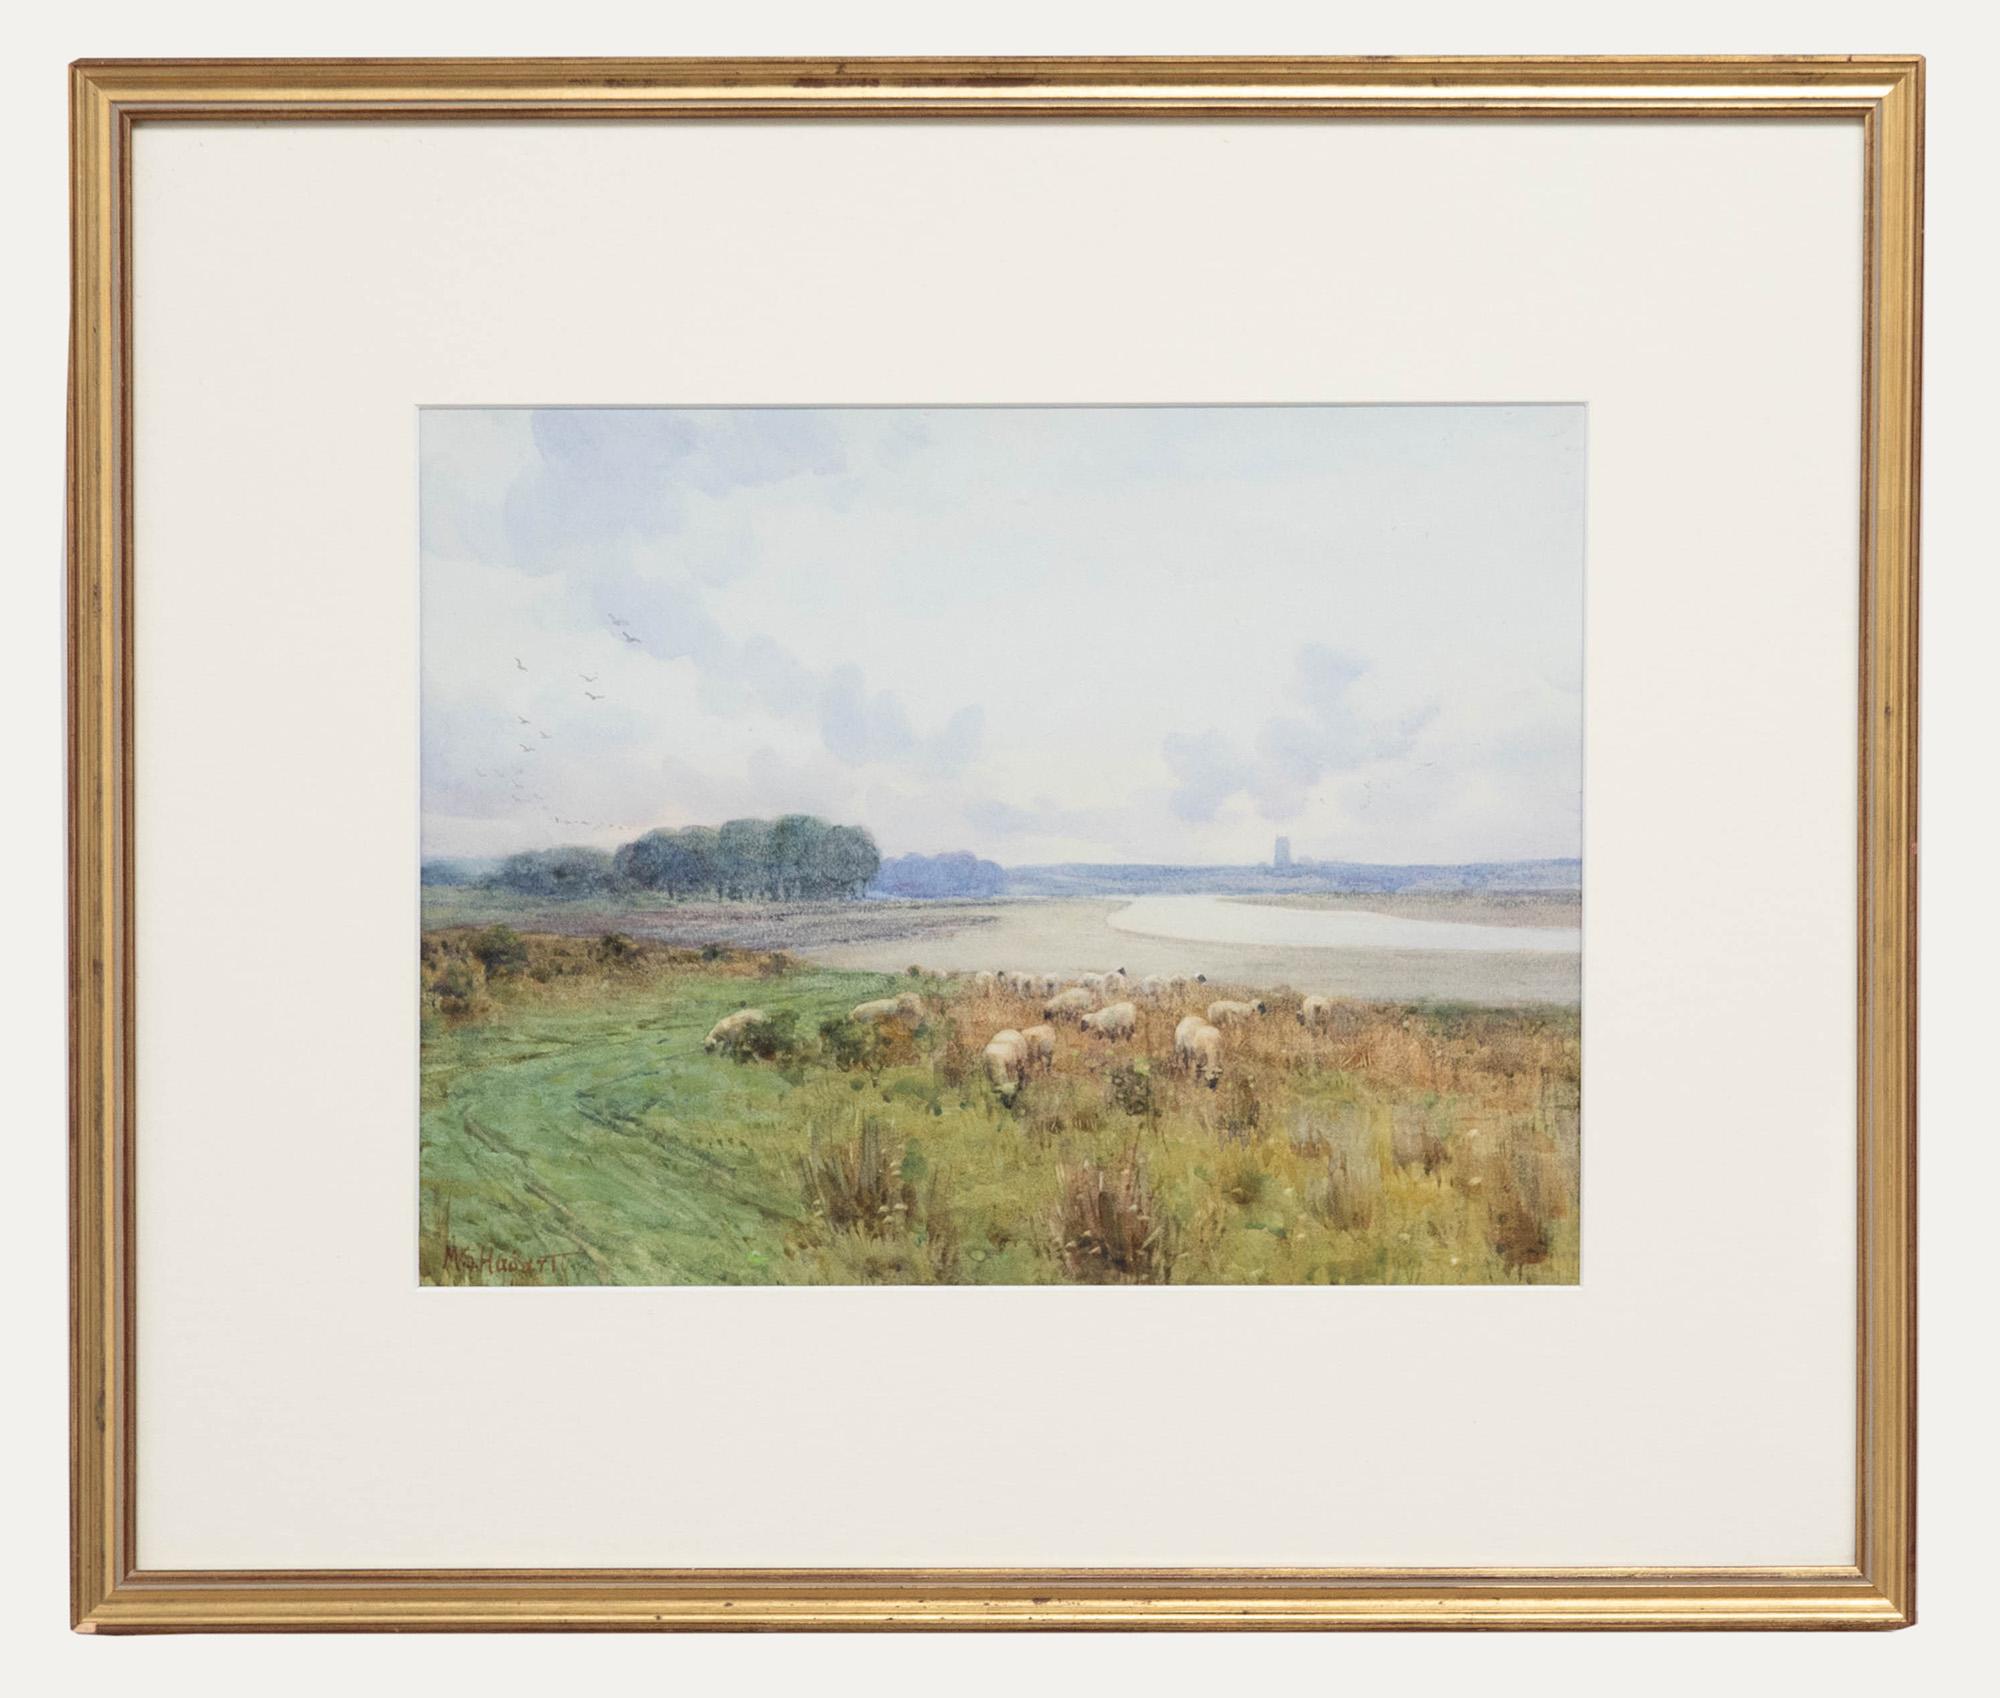 Unknown Landscape Art - Mary S. Hagarty (1857-1938)- Framed Watercolour, Sheep Grazing a River Landscape